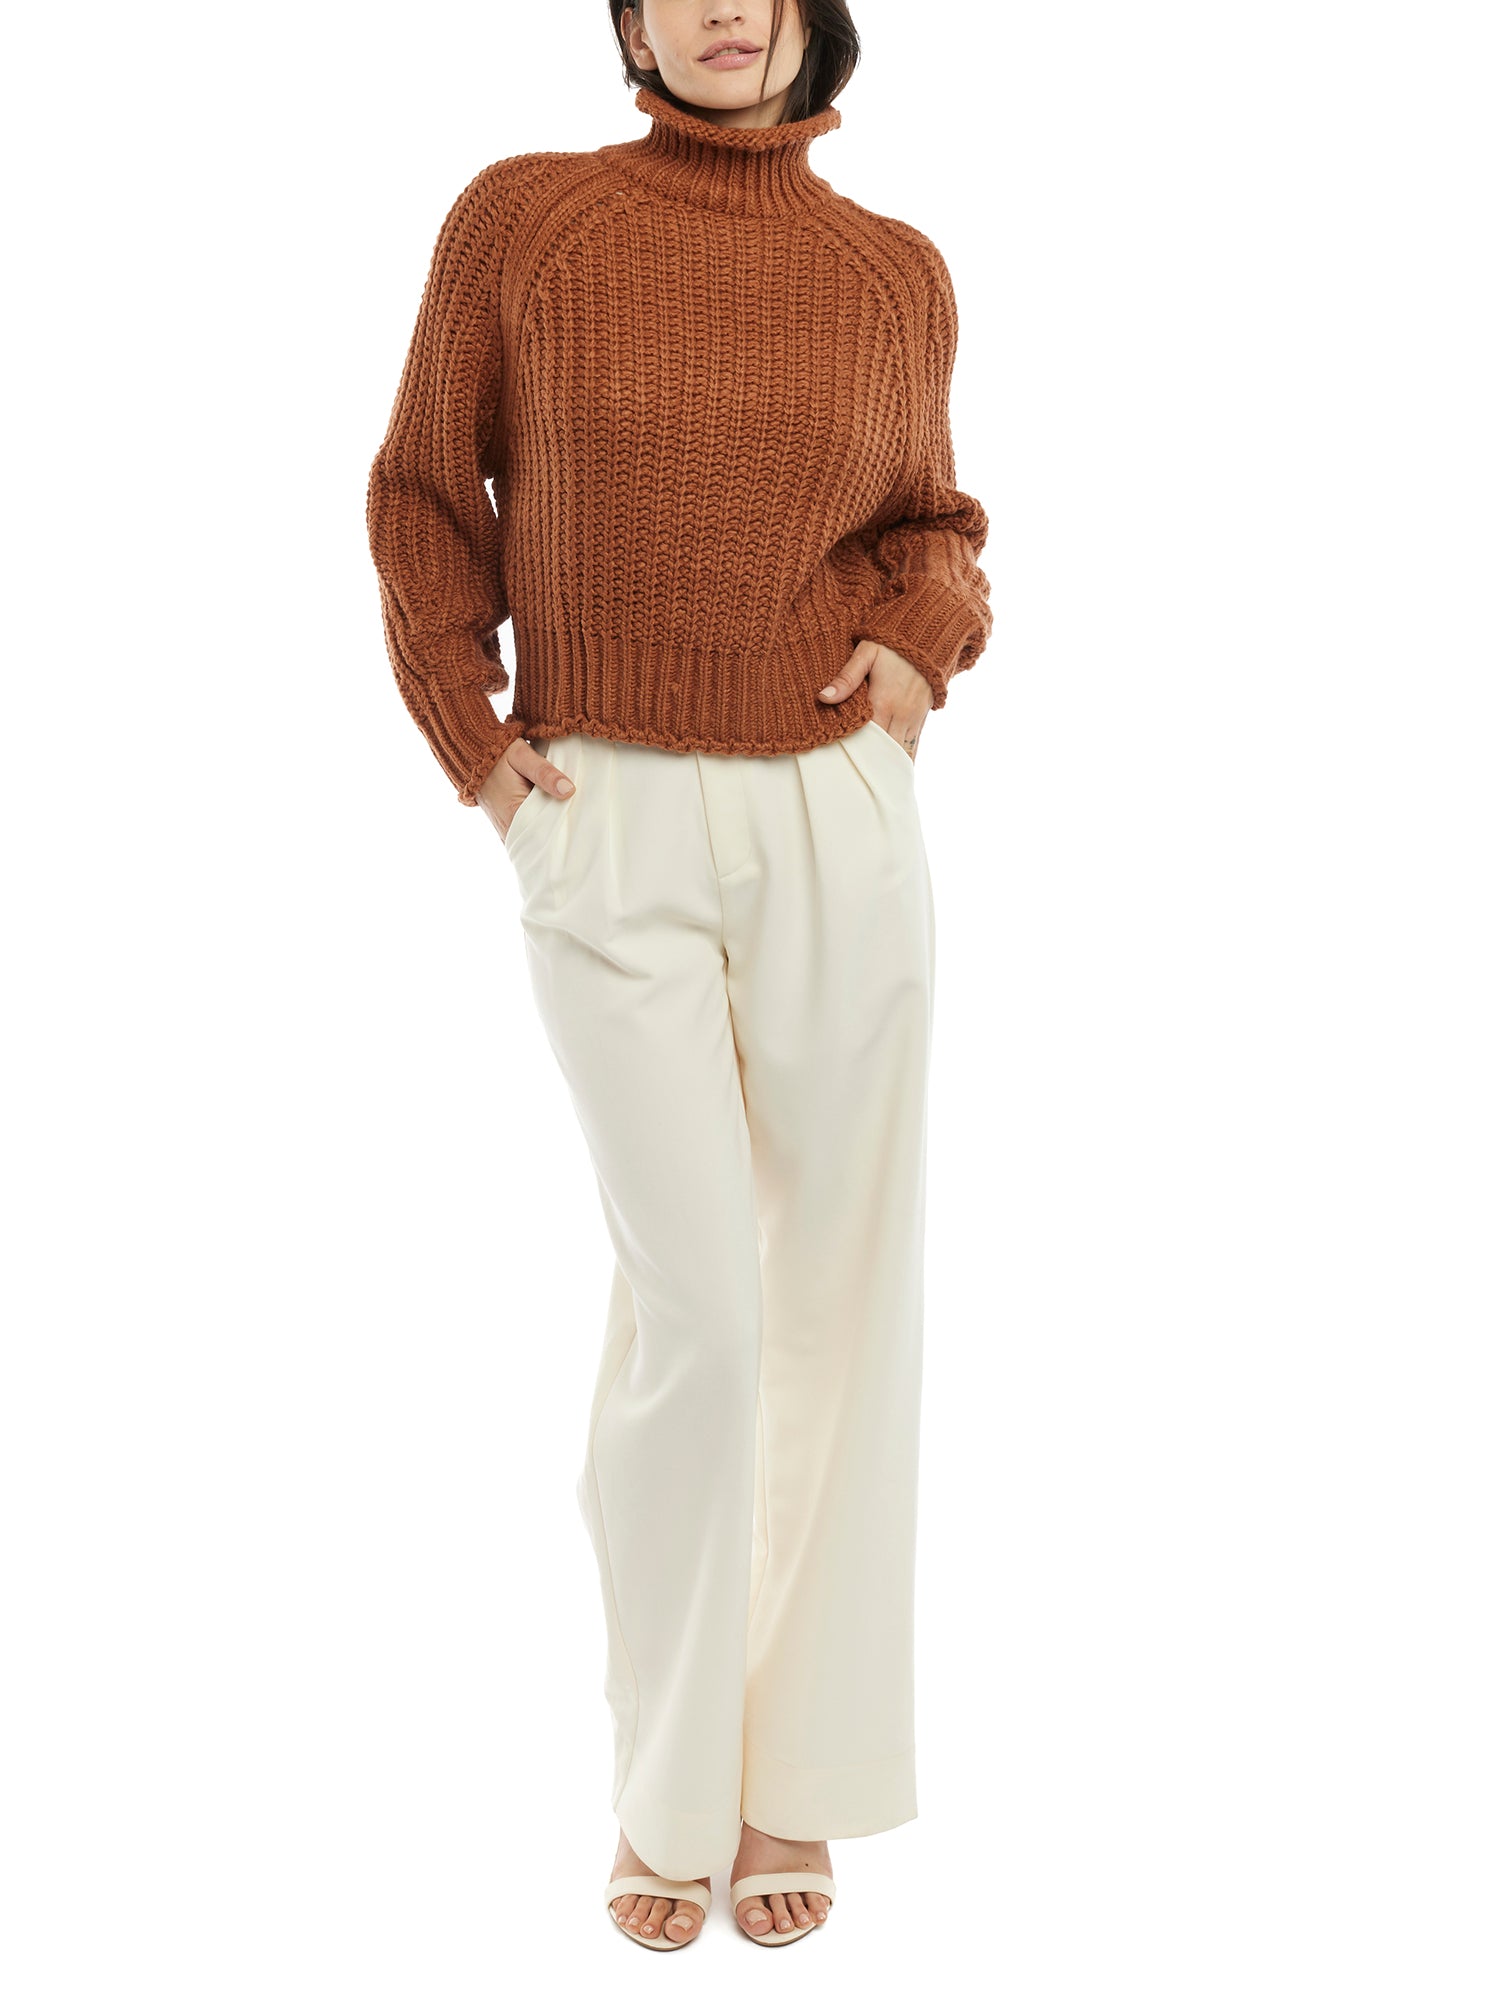 ribbed, chunky knit turtleneck sweater featuring slight balloon sleeves and a funnel neck in rust